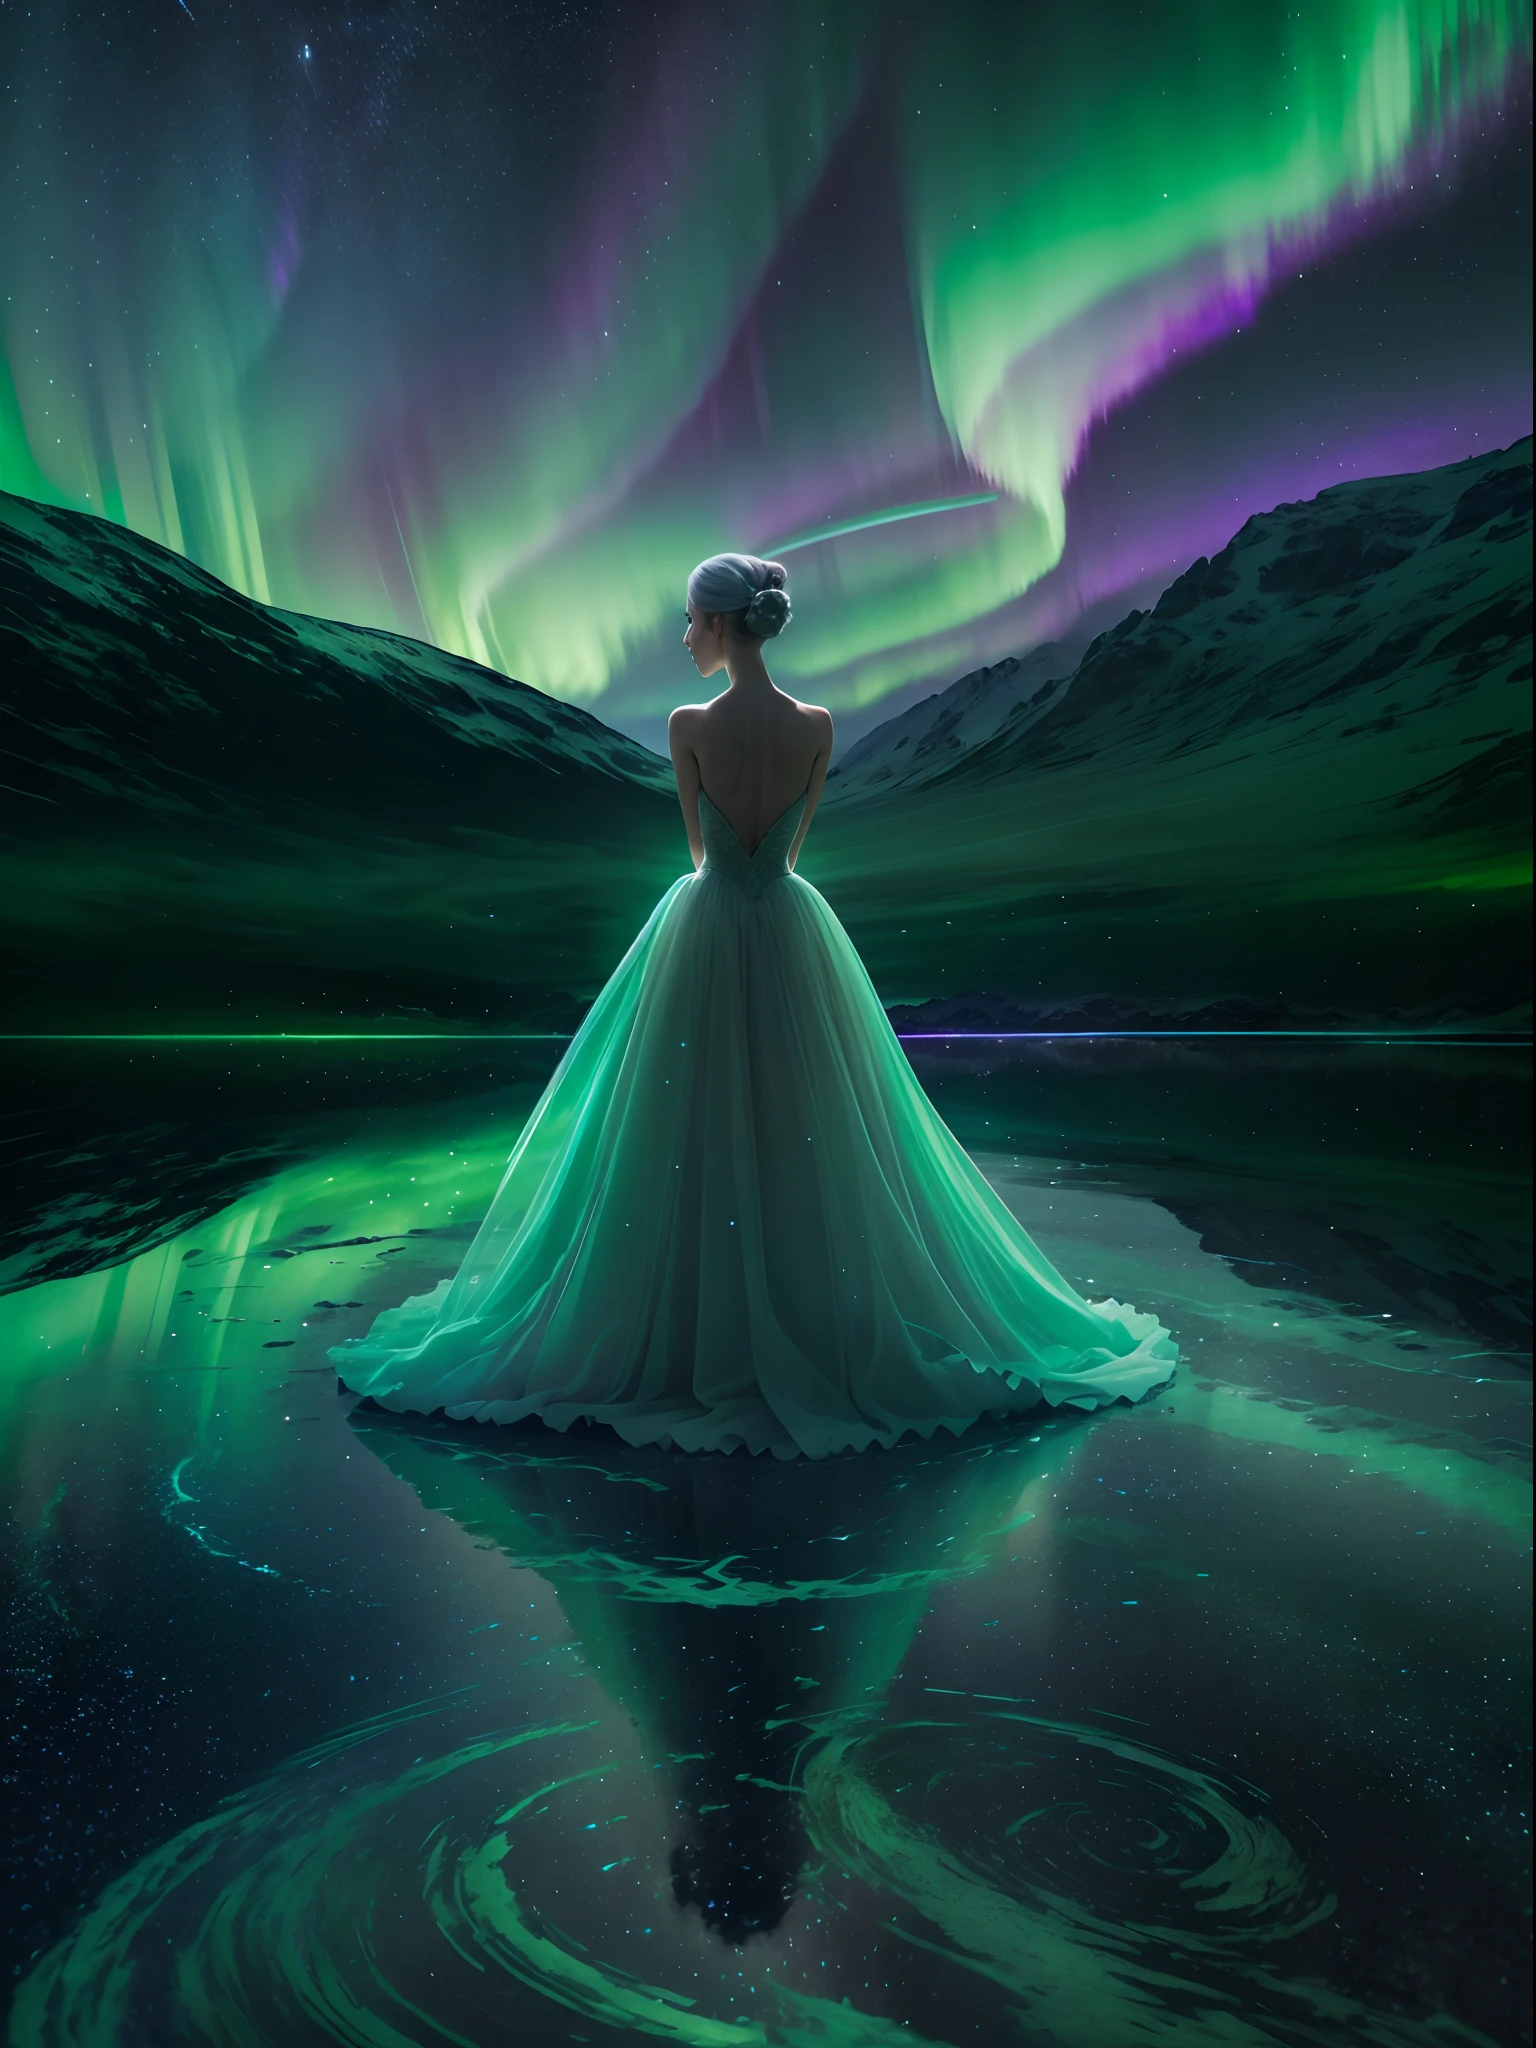 （Back of a ballet girl dancing under the Northern Lights）,Wear a long white ballet dress with many layers of yarn，（Girl back），（The Northern Lights merge on the girl's body），Smart，dream magical，
Green and purple Northern Lights meteor showers drill in the mountains, dramatic aurora borealis, northern lights background, Northern Lights on the background, aurora borealis, northern lights background, Magnificent background, with aurora borealis in the sky, The Northern Lights in space in surreal and dreamlike landscape style, Light black and emerald,  8K resolution,  minimalistbackground, Monochrome contemplation from an upward perspective，ultraclear